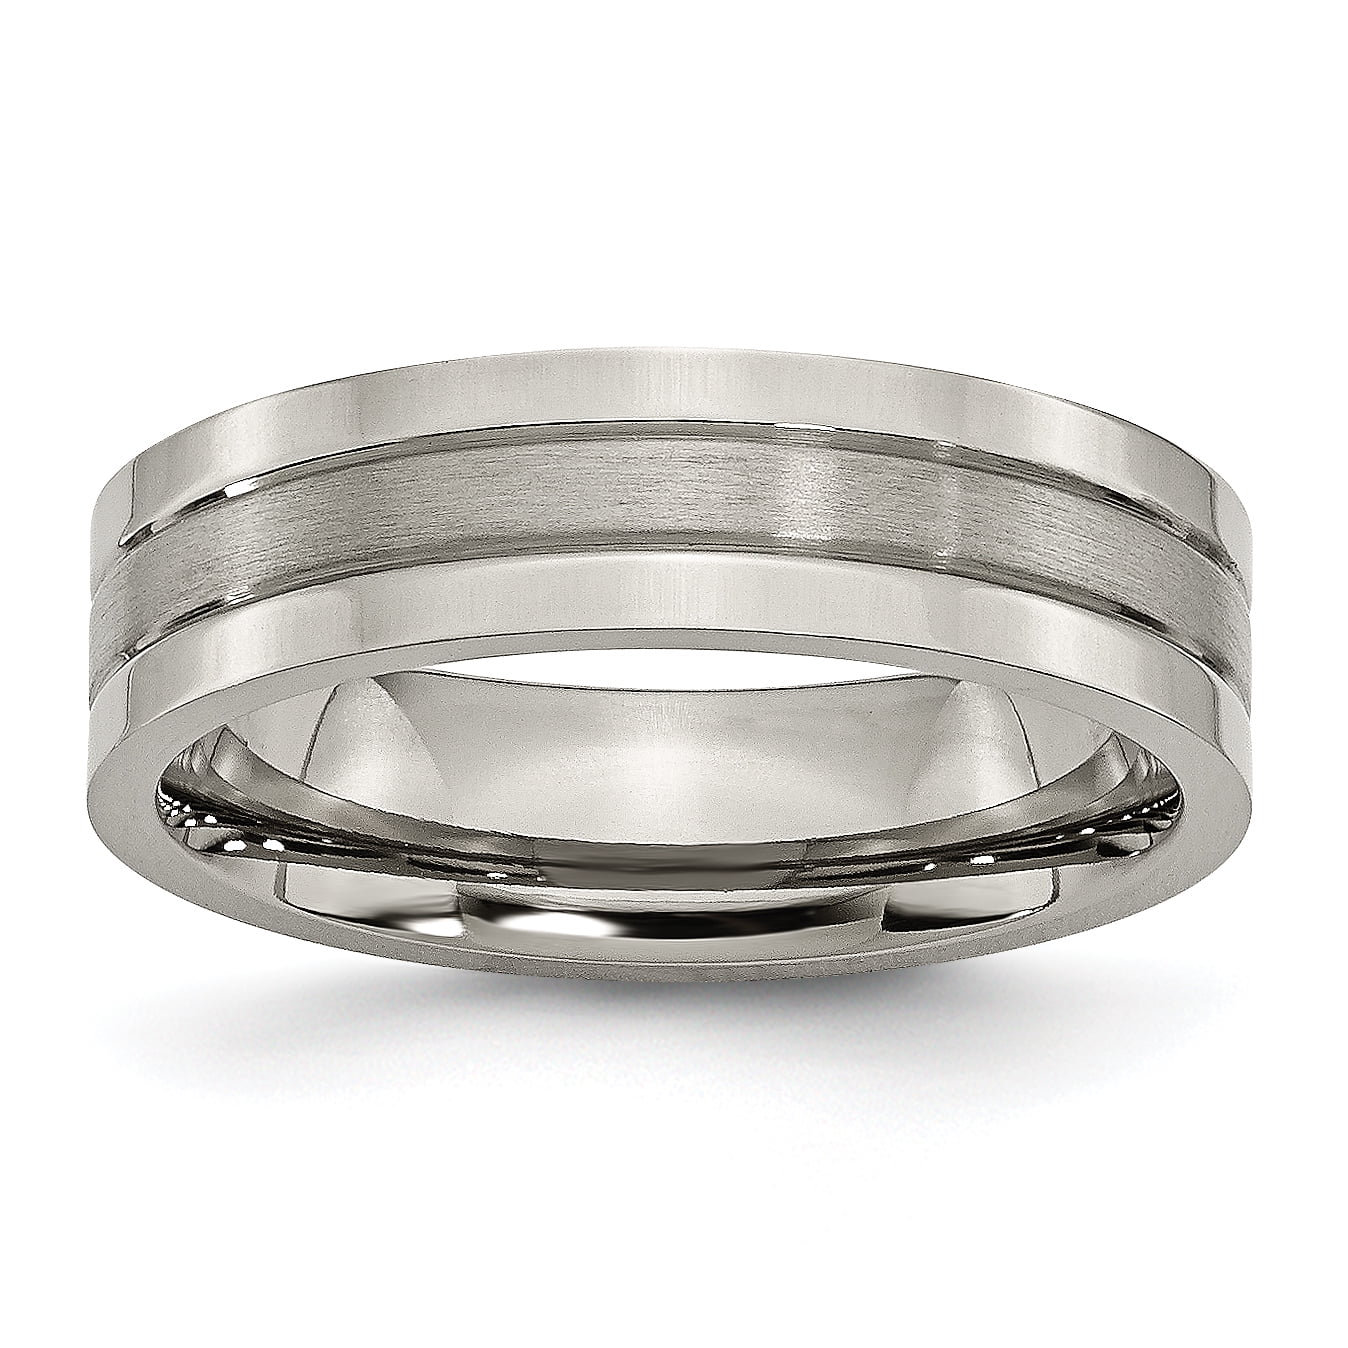 Jewels By Lux Titanium Grooved 6mm Satin Band